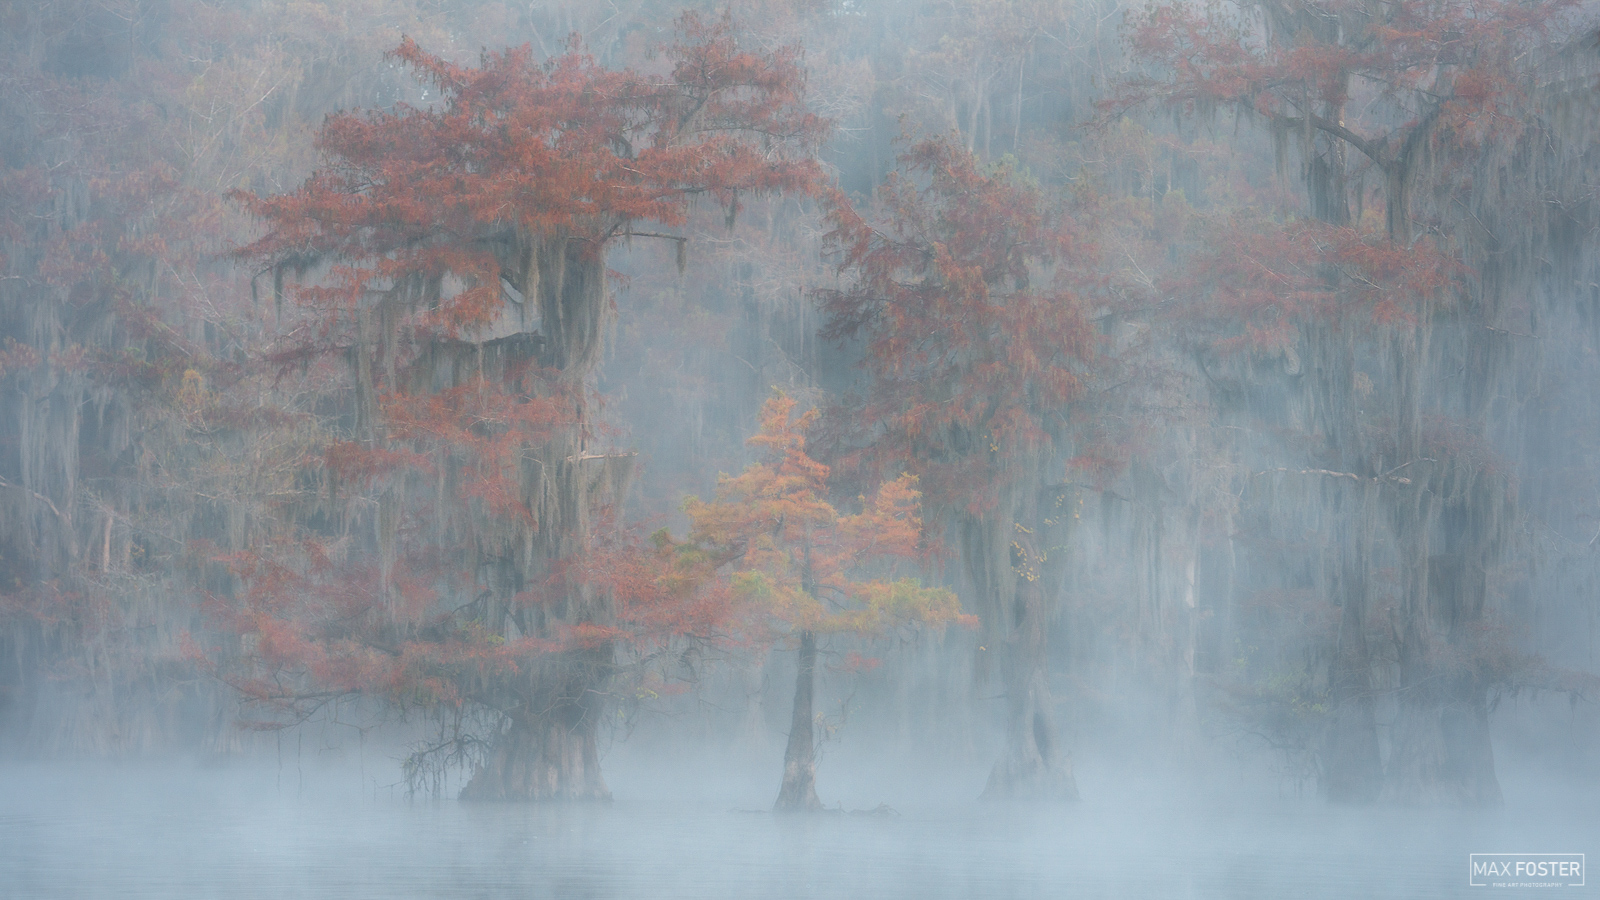 Refresh your space with Nature's Mystery, Max Foster's limited edition photography print of bald cypress in Caddo Lake, Texas...